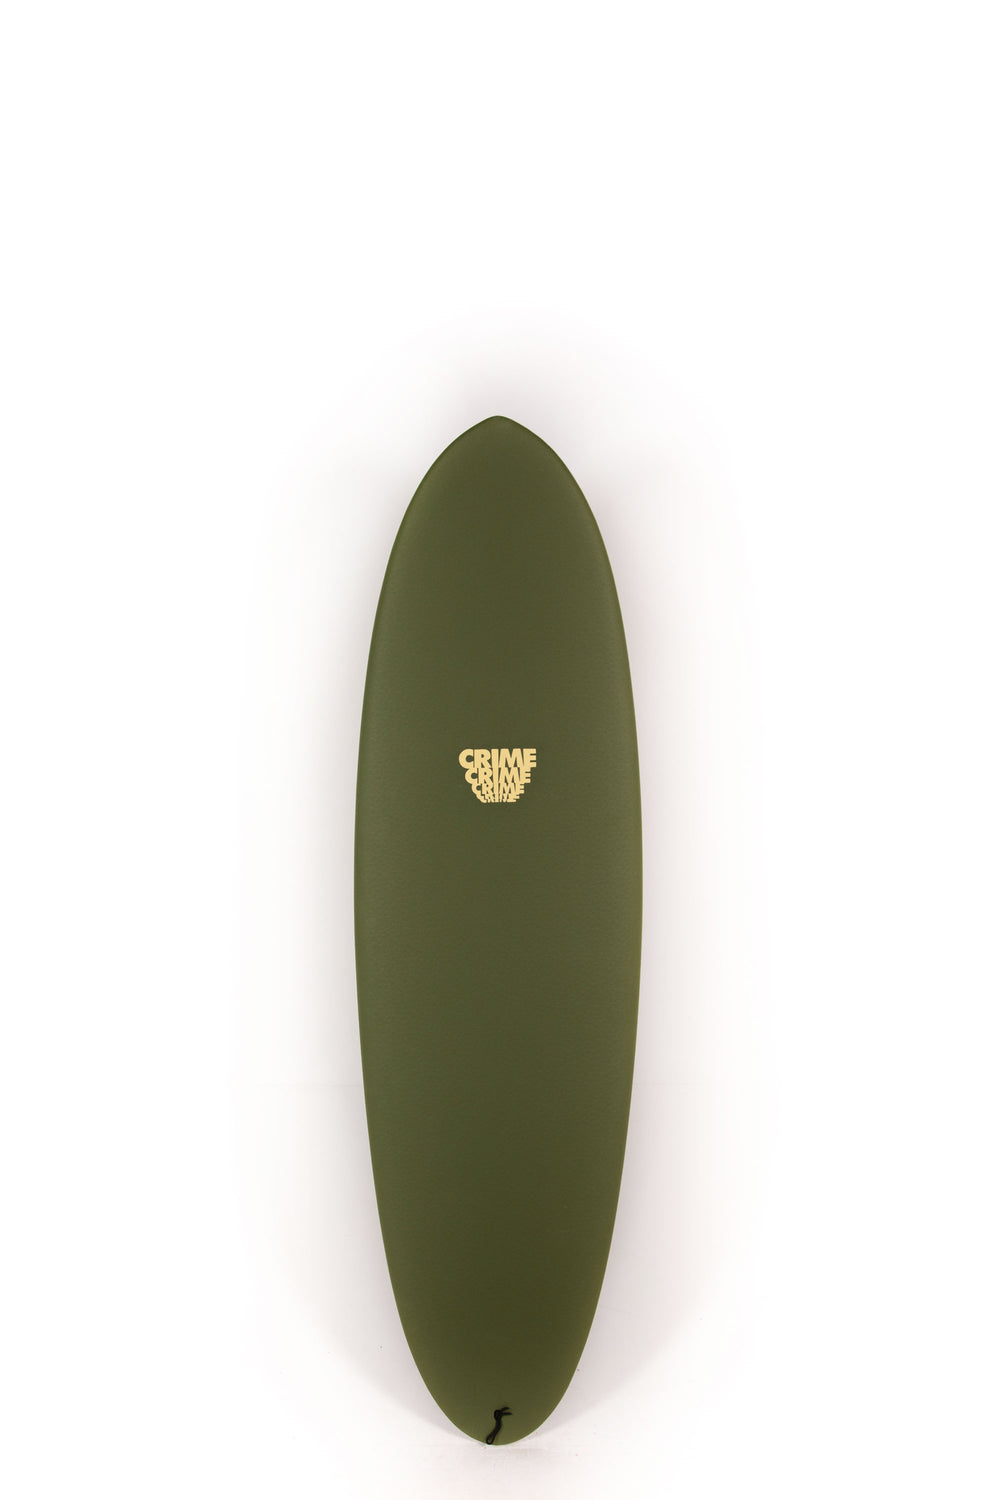 Pukas-Surf-Shop-Crime-Surfboards-Stubby-Army-6_6